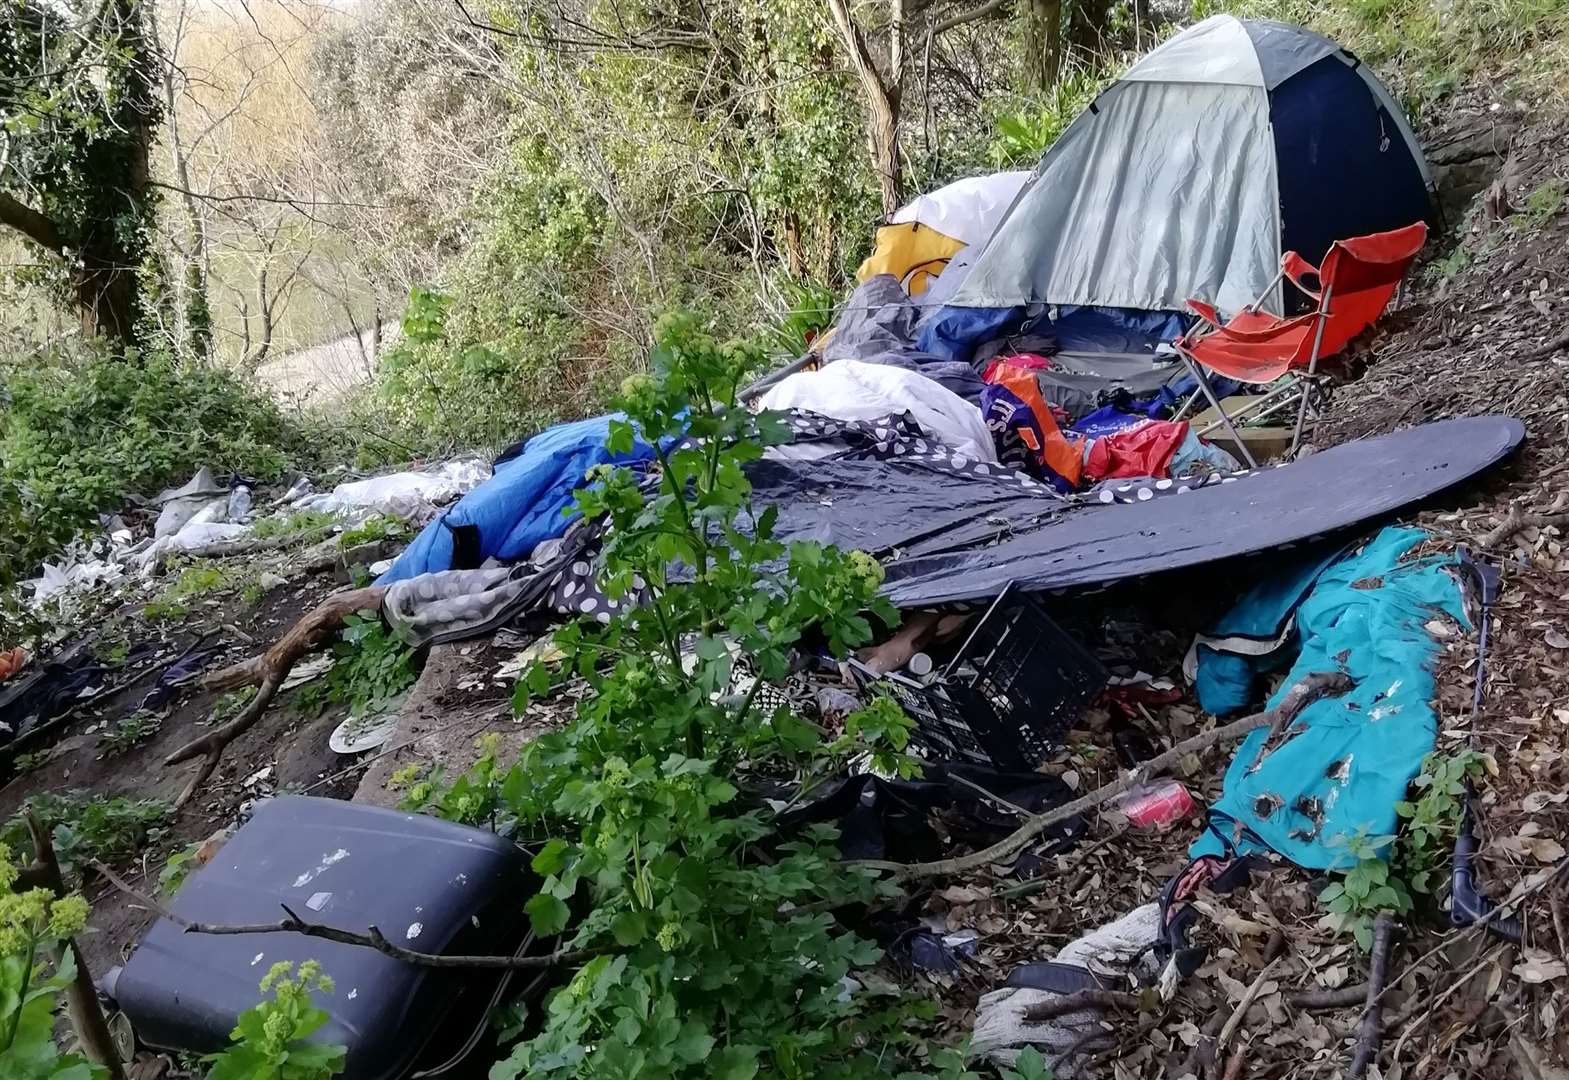 Clothing, discarded food and drink packaging and camping equipment have been dumped at two sites